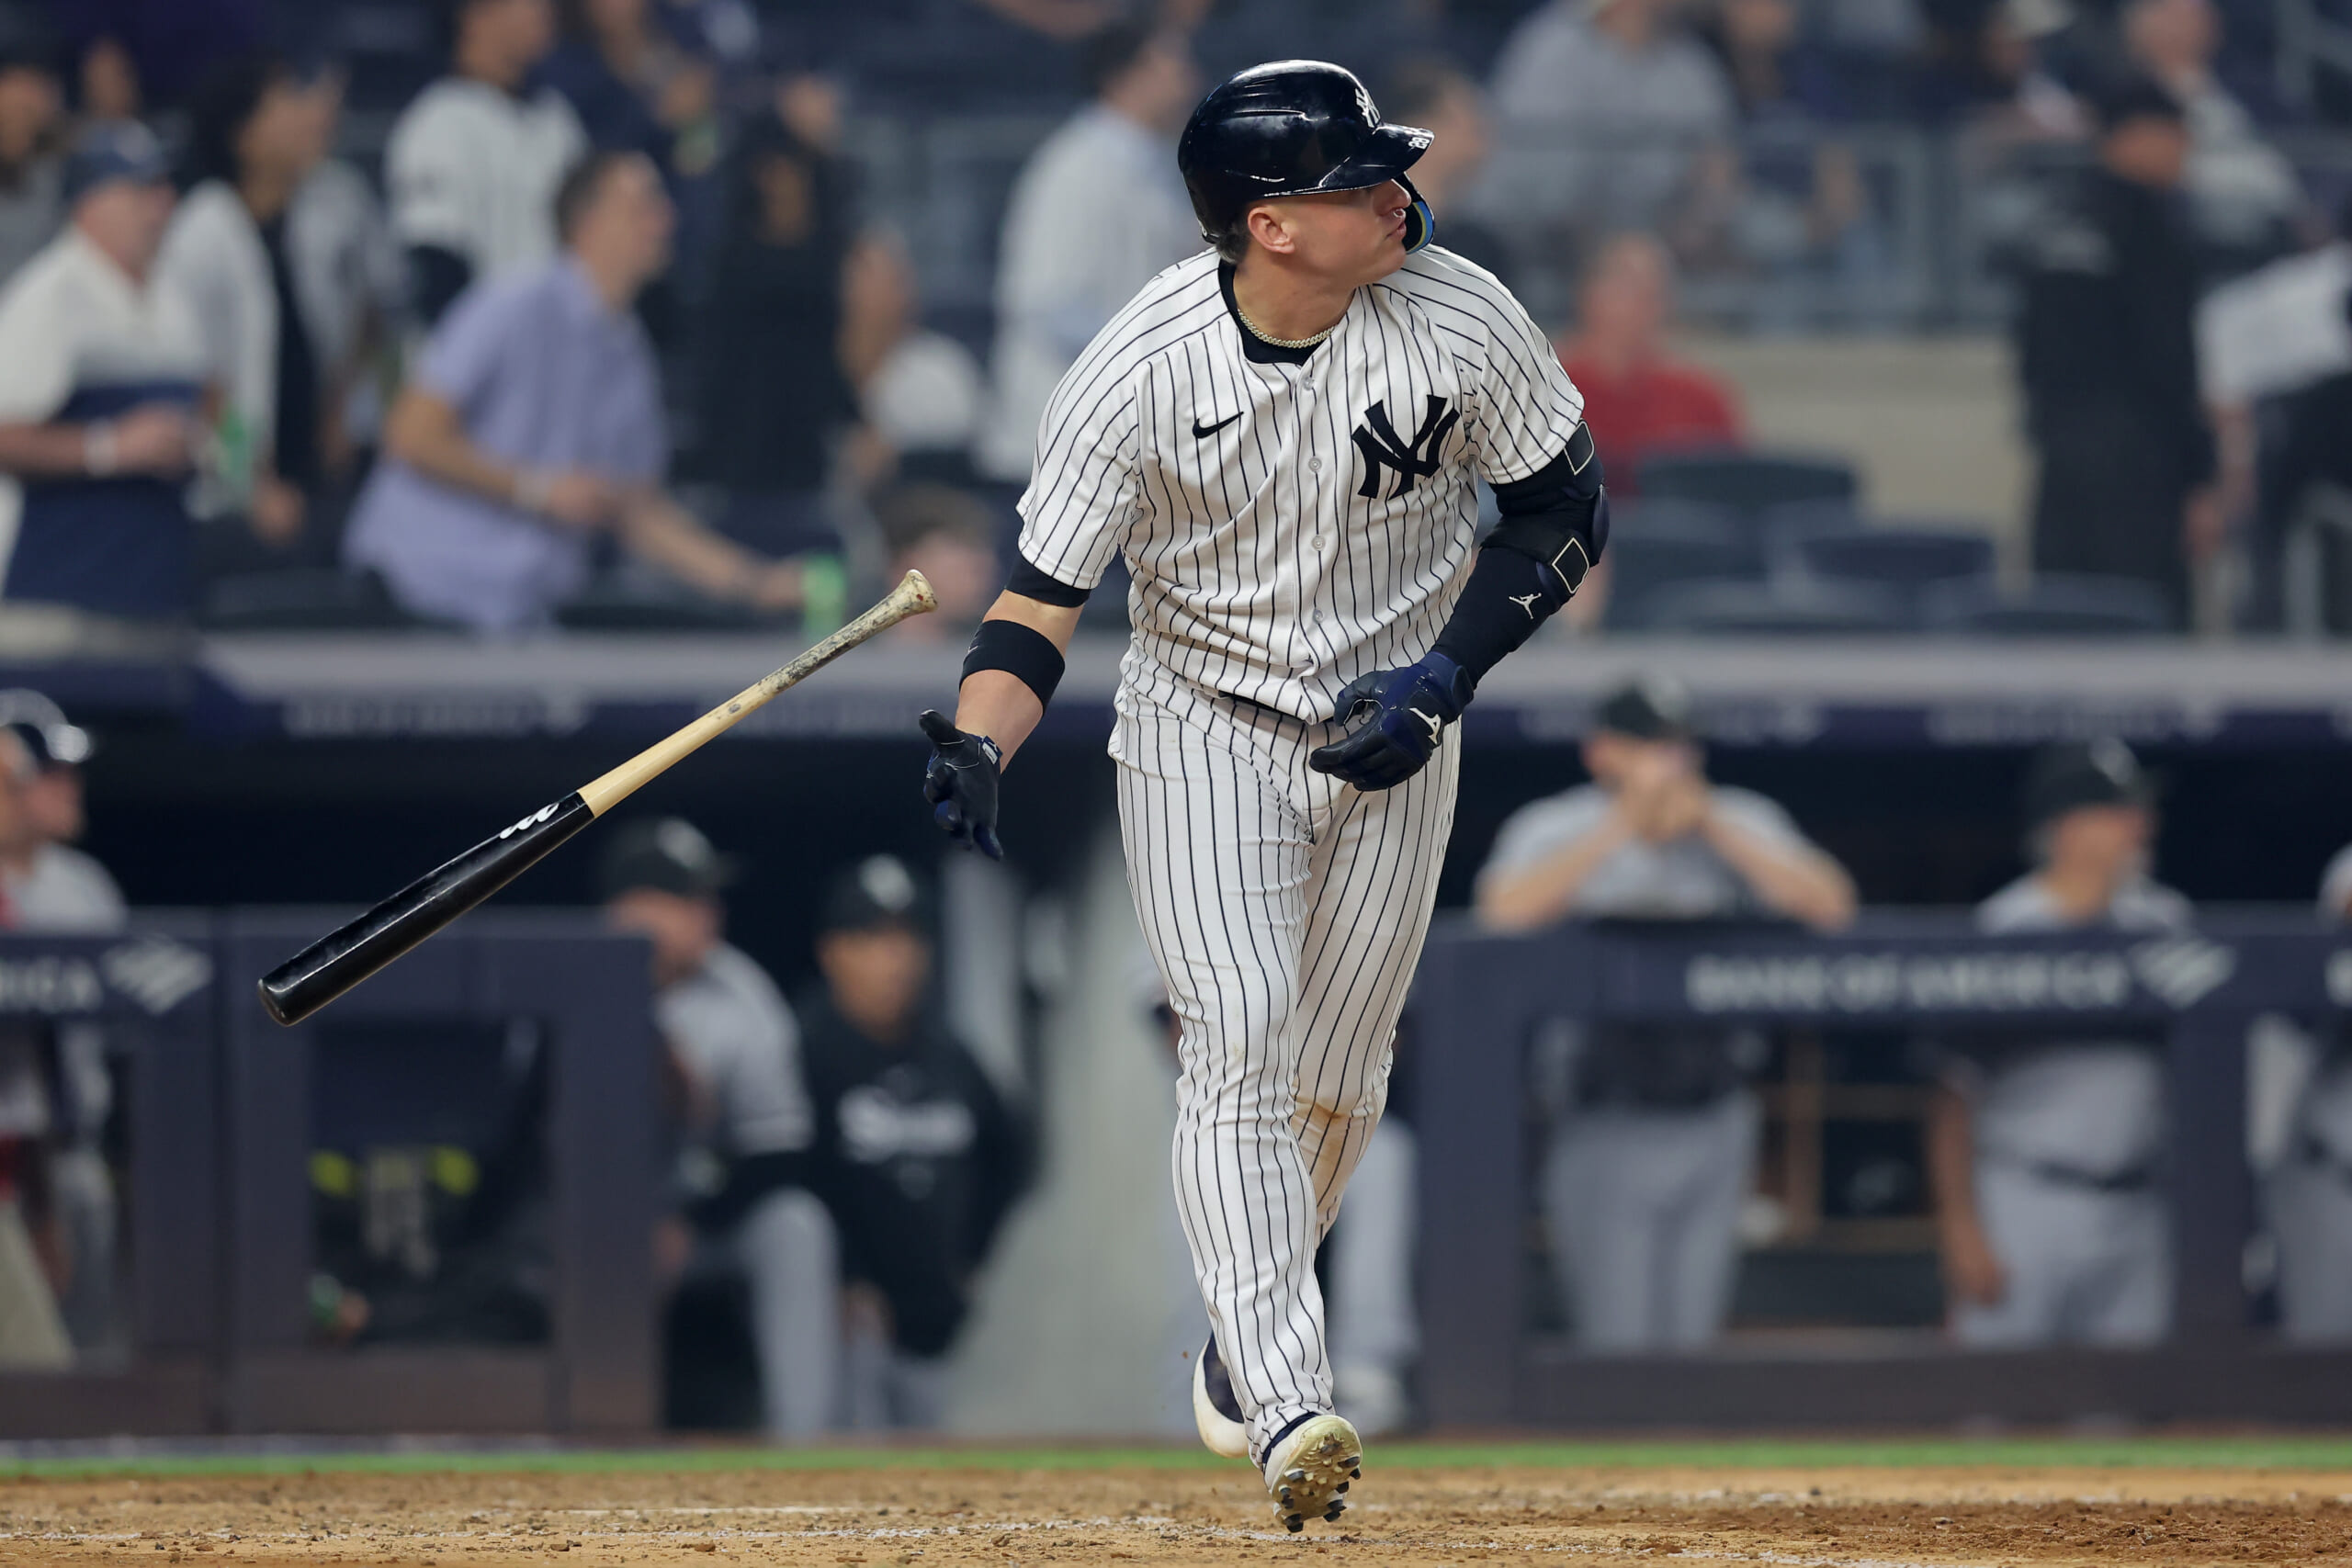 Yankees' $25 million infielder showing signs of life